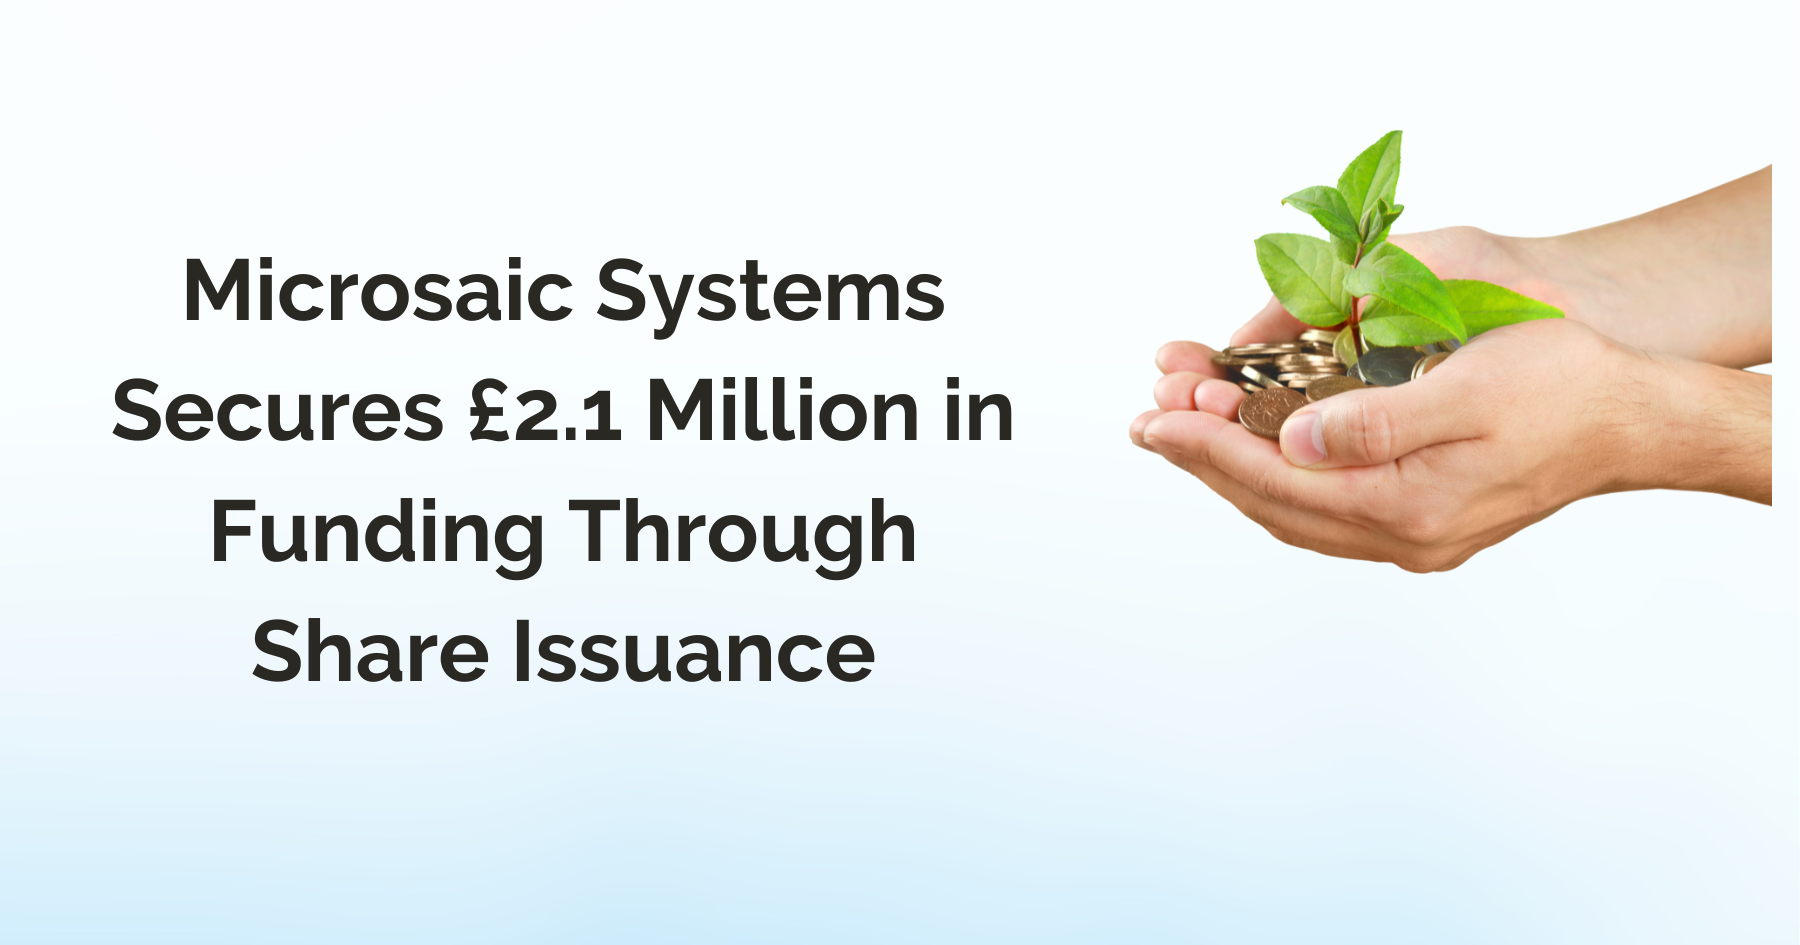 Microsaic Systems Secures £2.1 Million in Funding Through Share Issuance